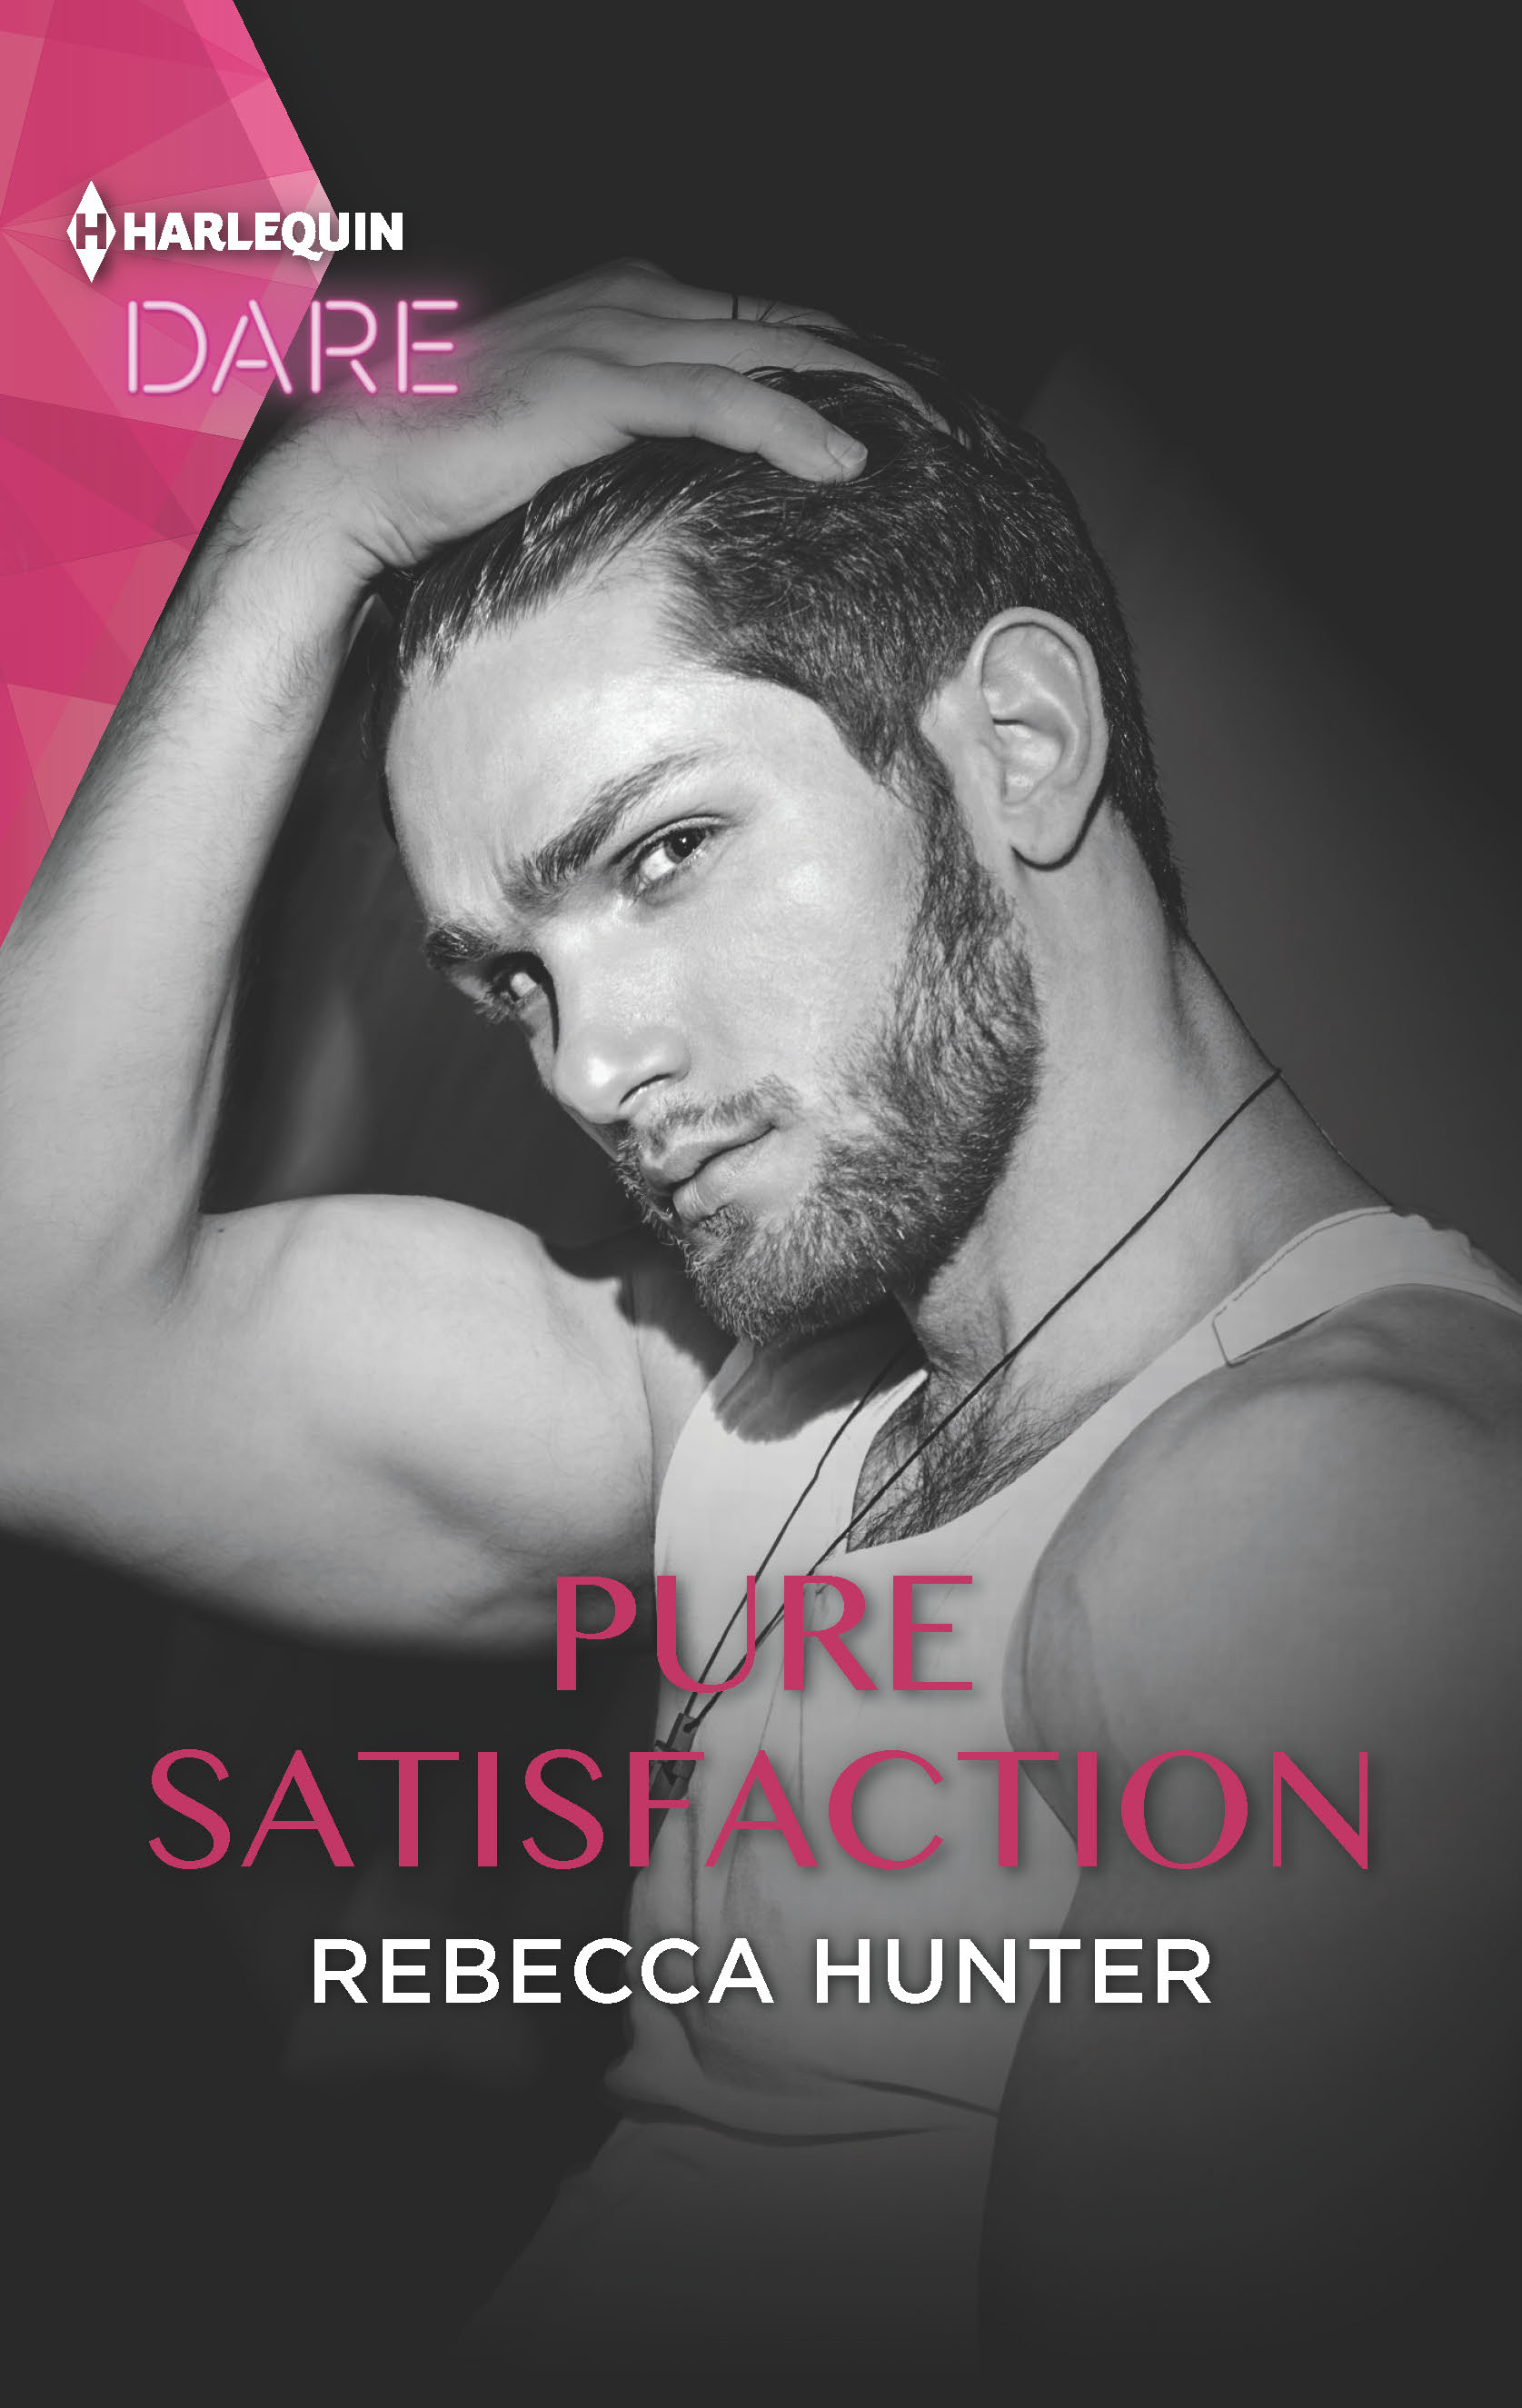 Pure Satisfaction by Rebecca Hunter, cover art